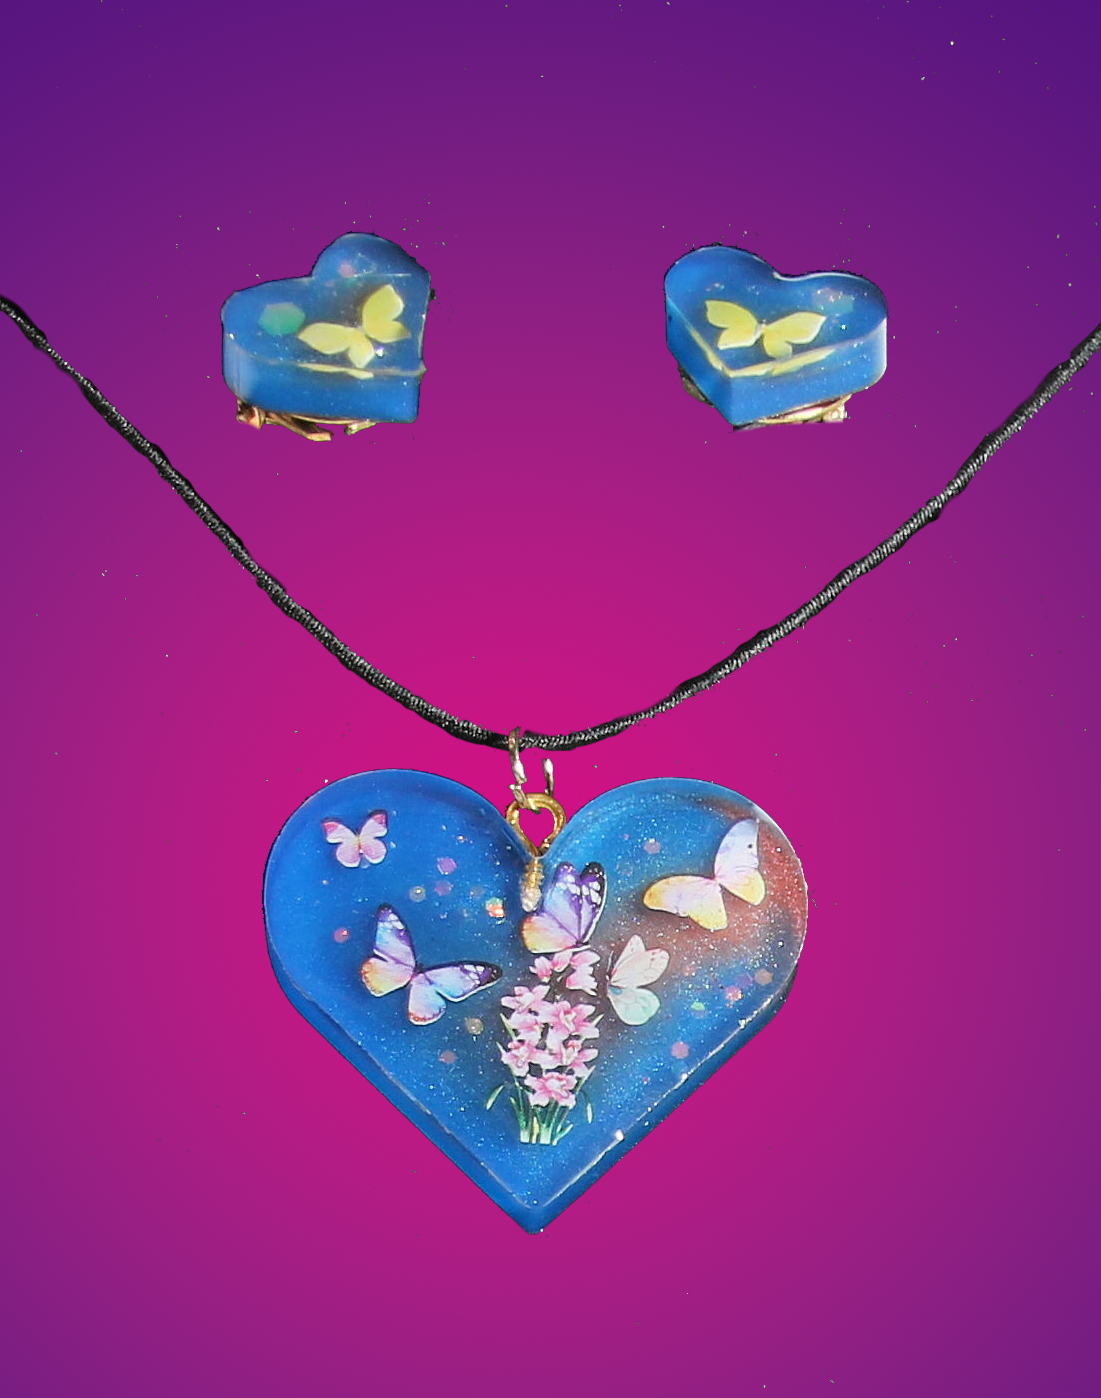 Blue Heart Shaped Pendant with Butterflies and Matching Clip-On Earrings